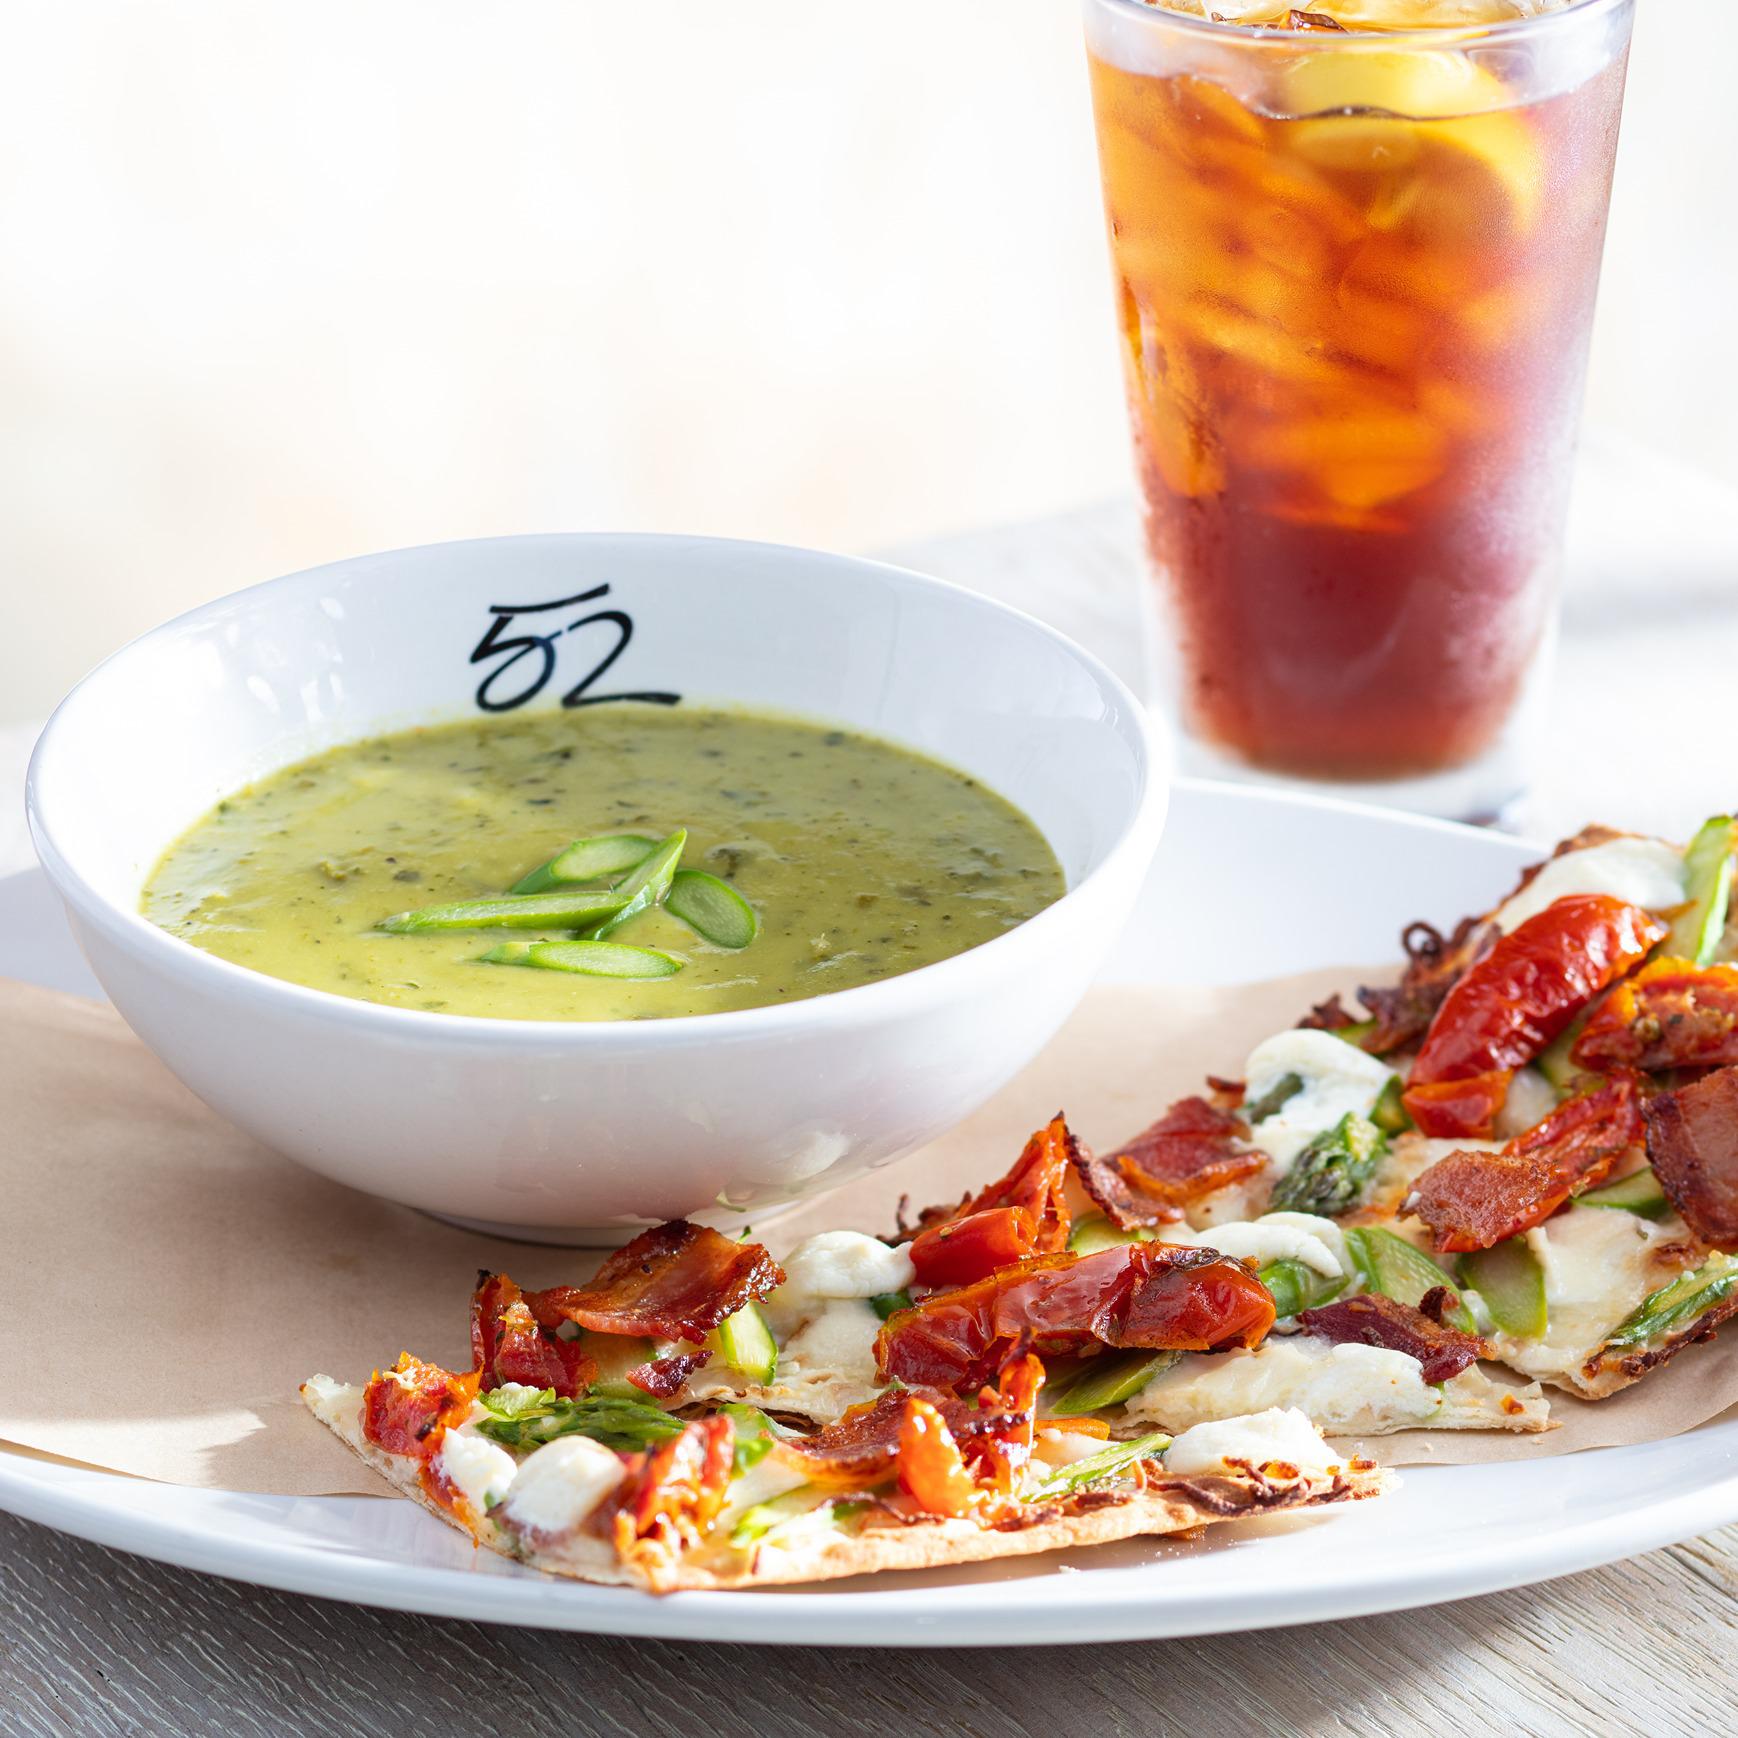 Our seasonal menu offers a variety of lunch pairings of a half flatbread with a soup or salad, as well as entrées and handhelds